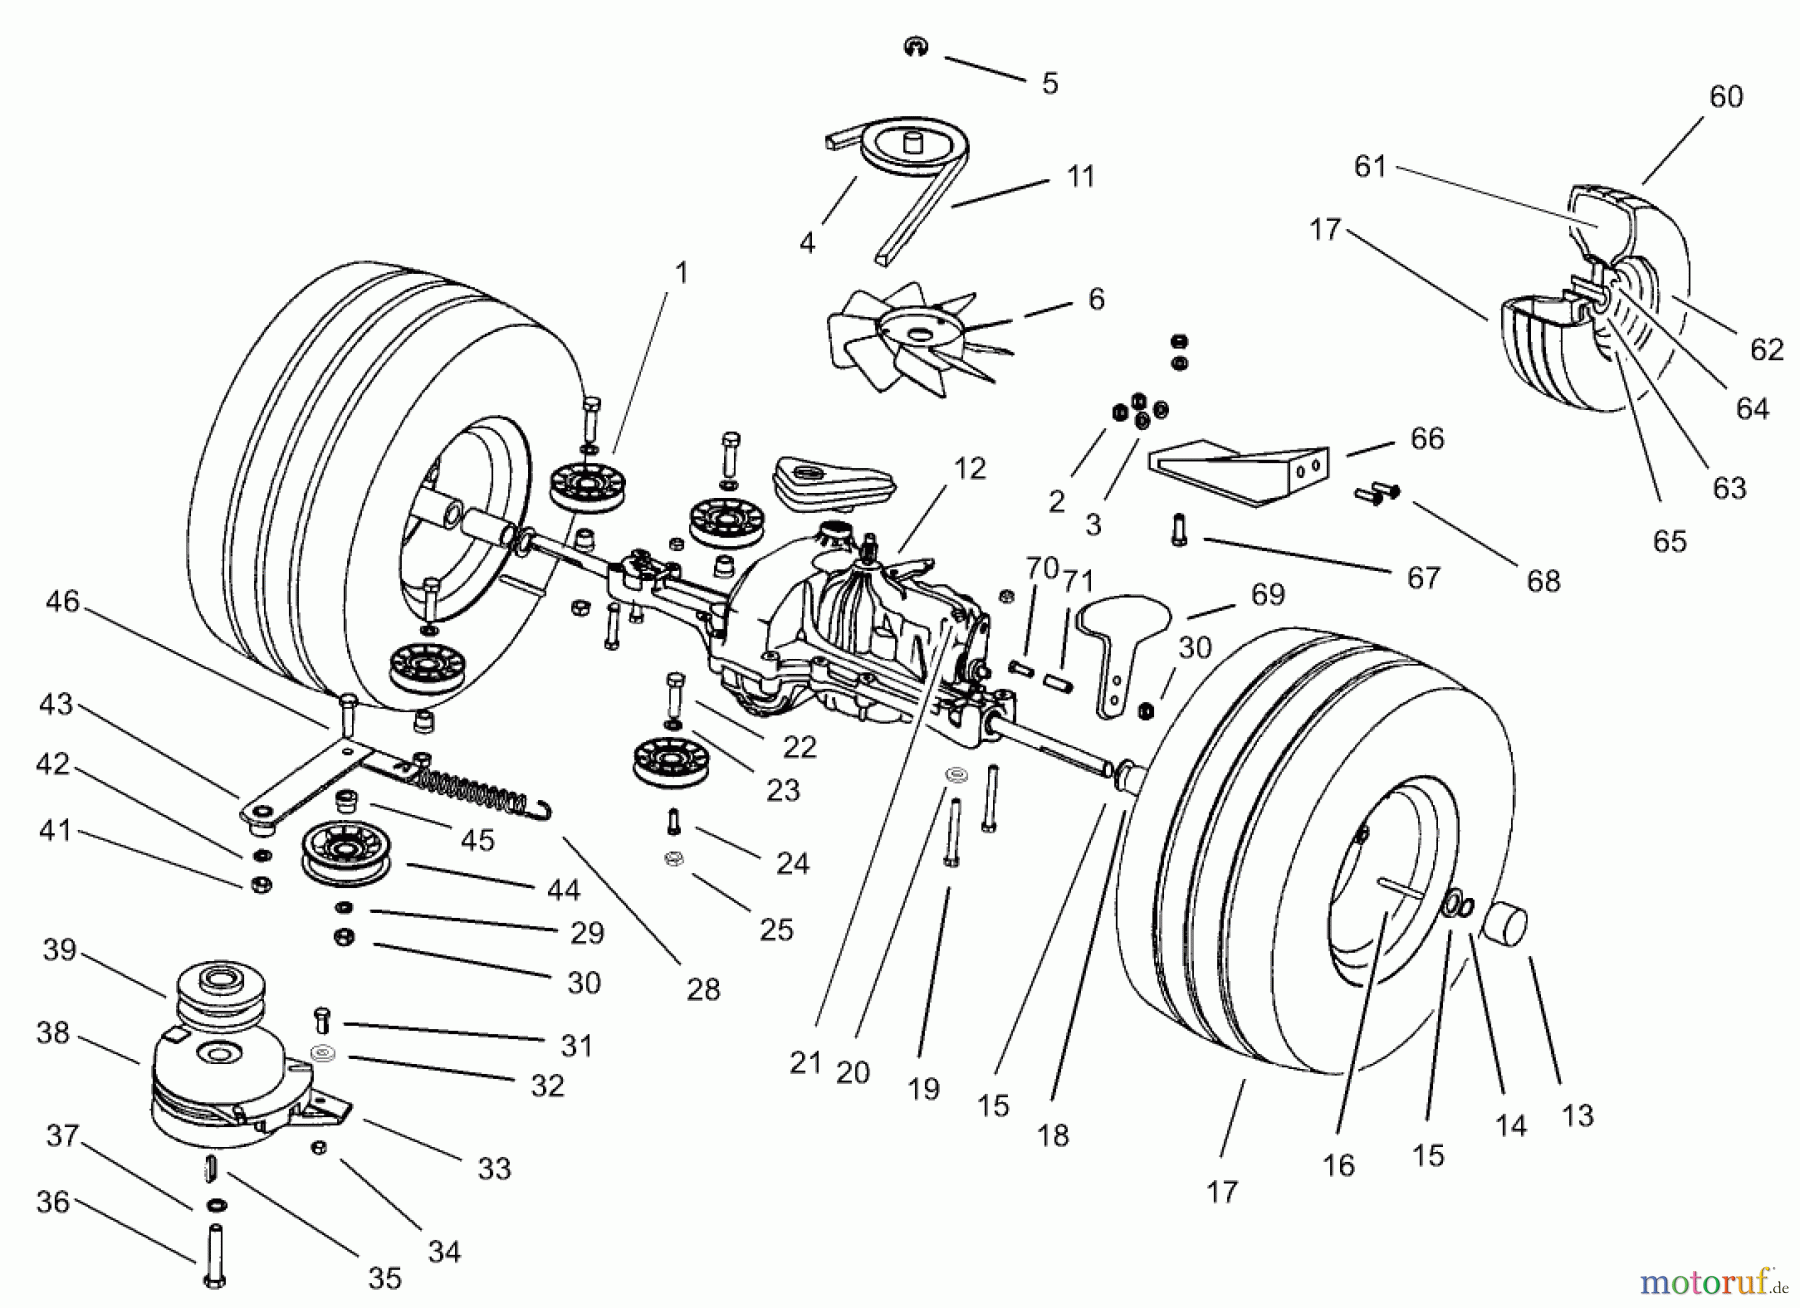  Toro Neu Mowers, Lawn & Garden Tractor Seite 1 74570 (170-DH) - Toro 170-DH Lawn Tractor, 2000 (200000001-200999999) TRANSMISSION DRIVE ASSEMBLY